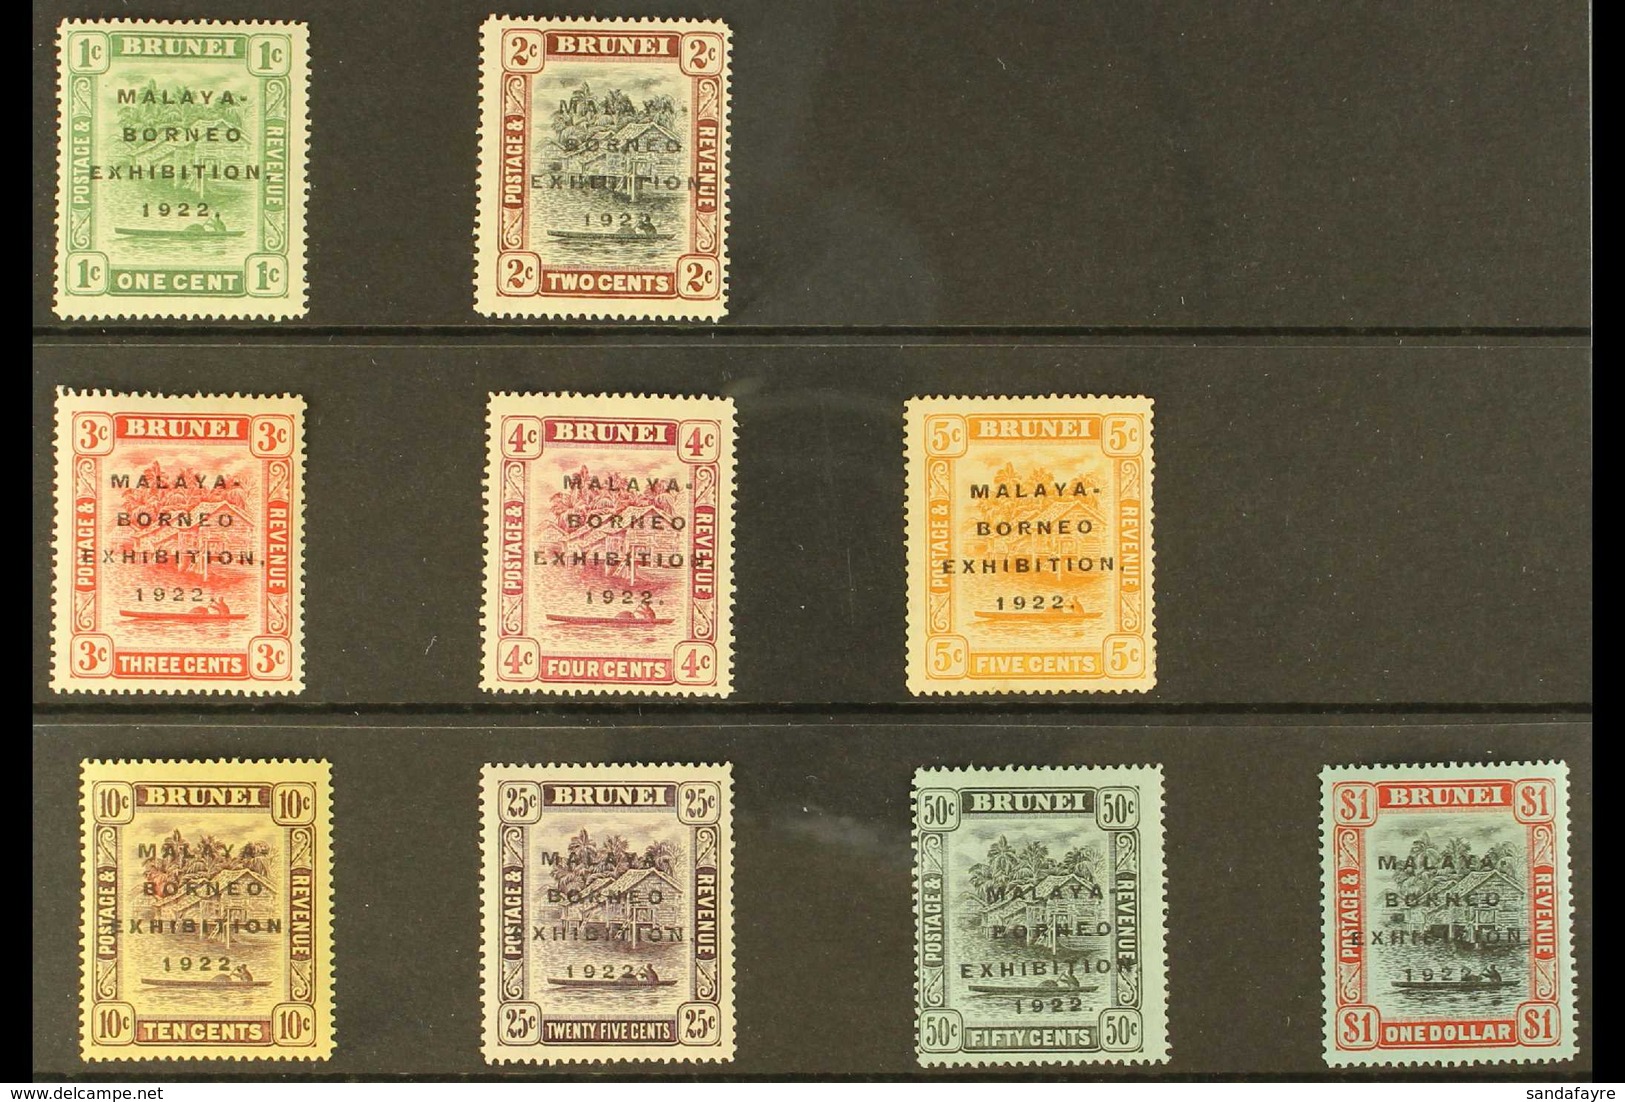 1922 MALAYA - BORNEO EXHIBITION Overprinted Definitive Set, SG 51/59, 5c With Short "I" Variety, Fine Mint (9 Stamps) Fo - Brunei (...-1984)